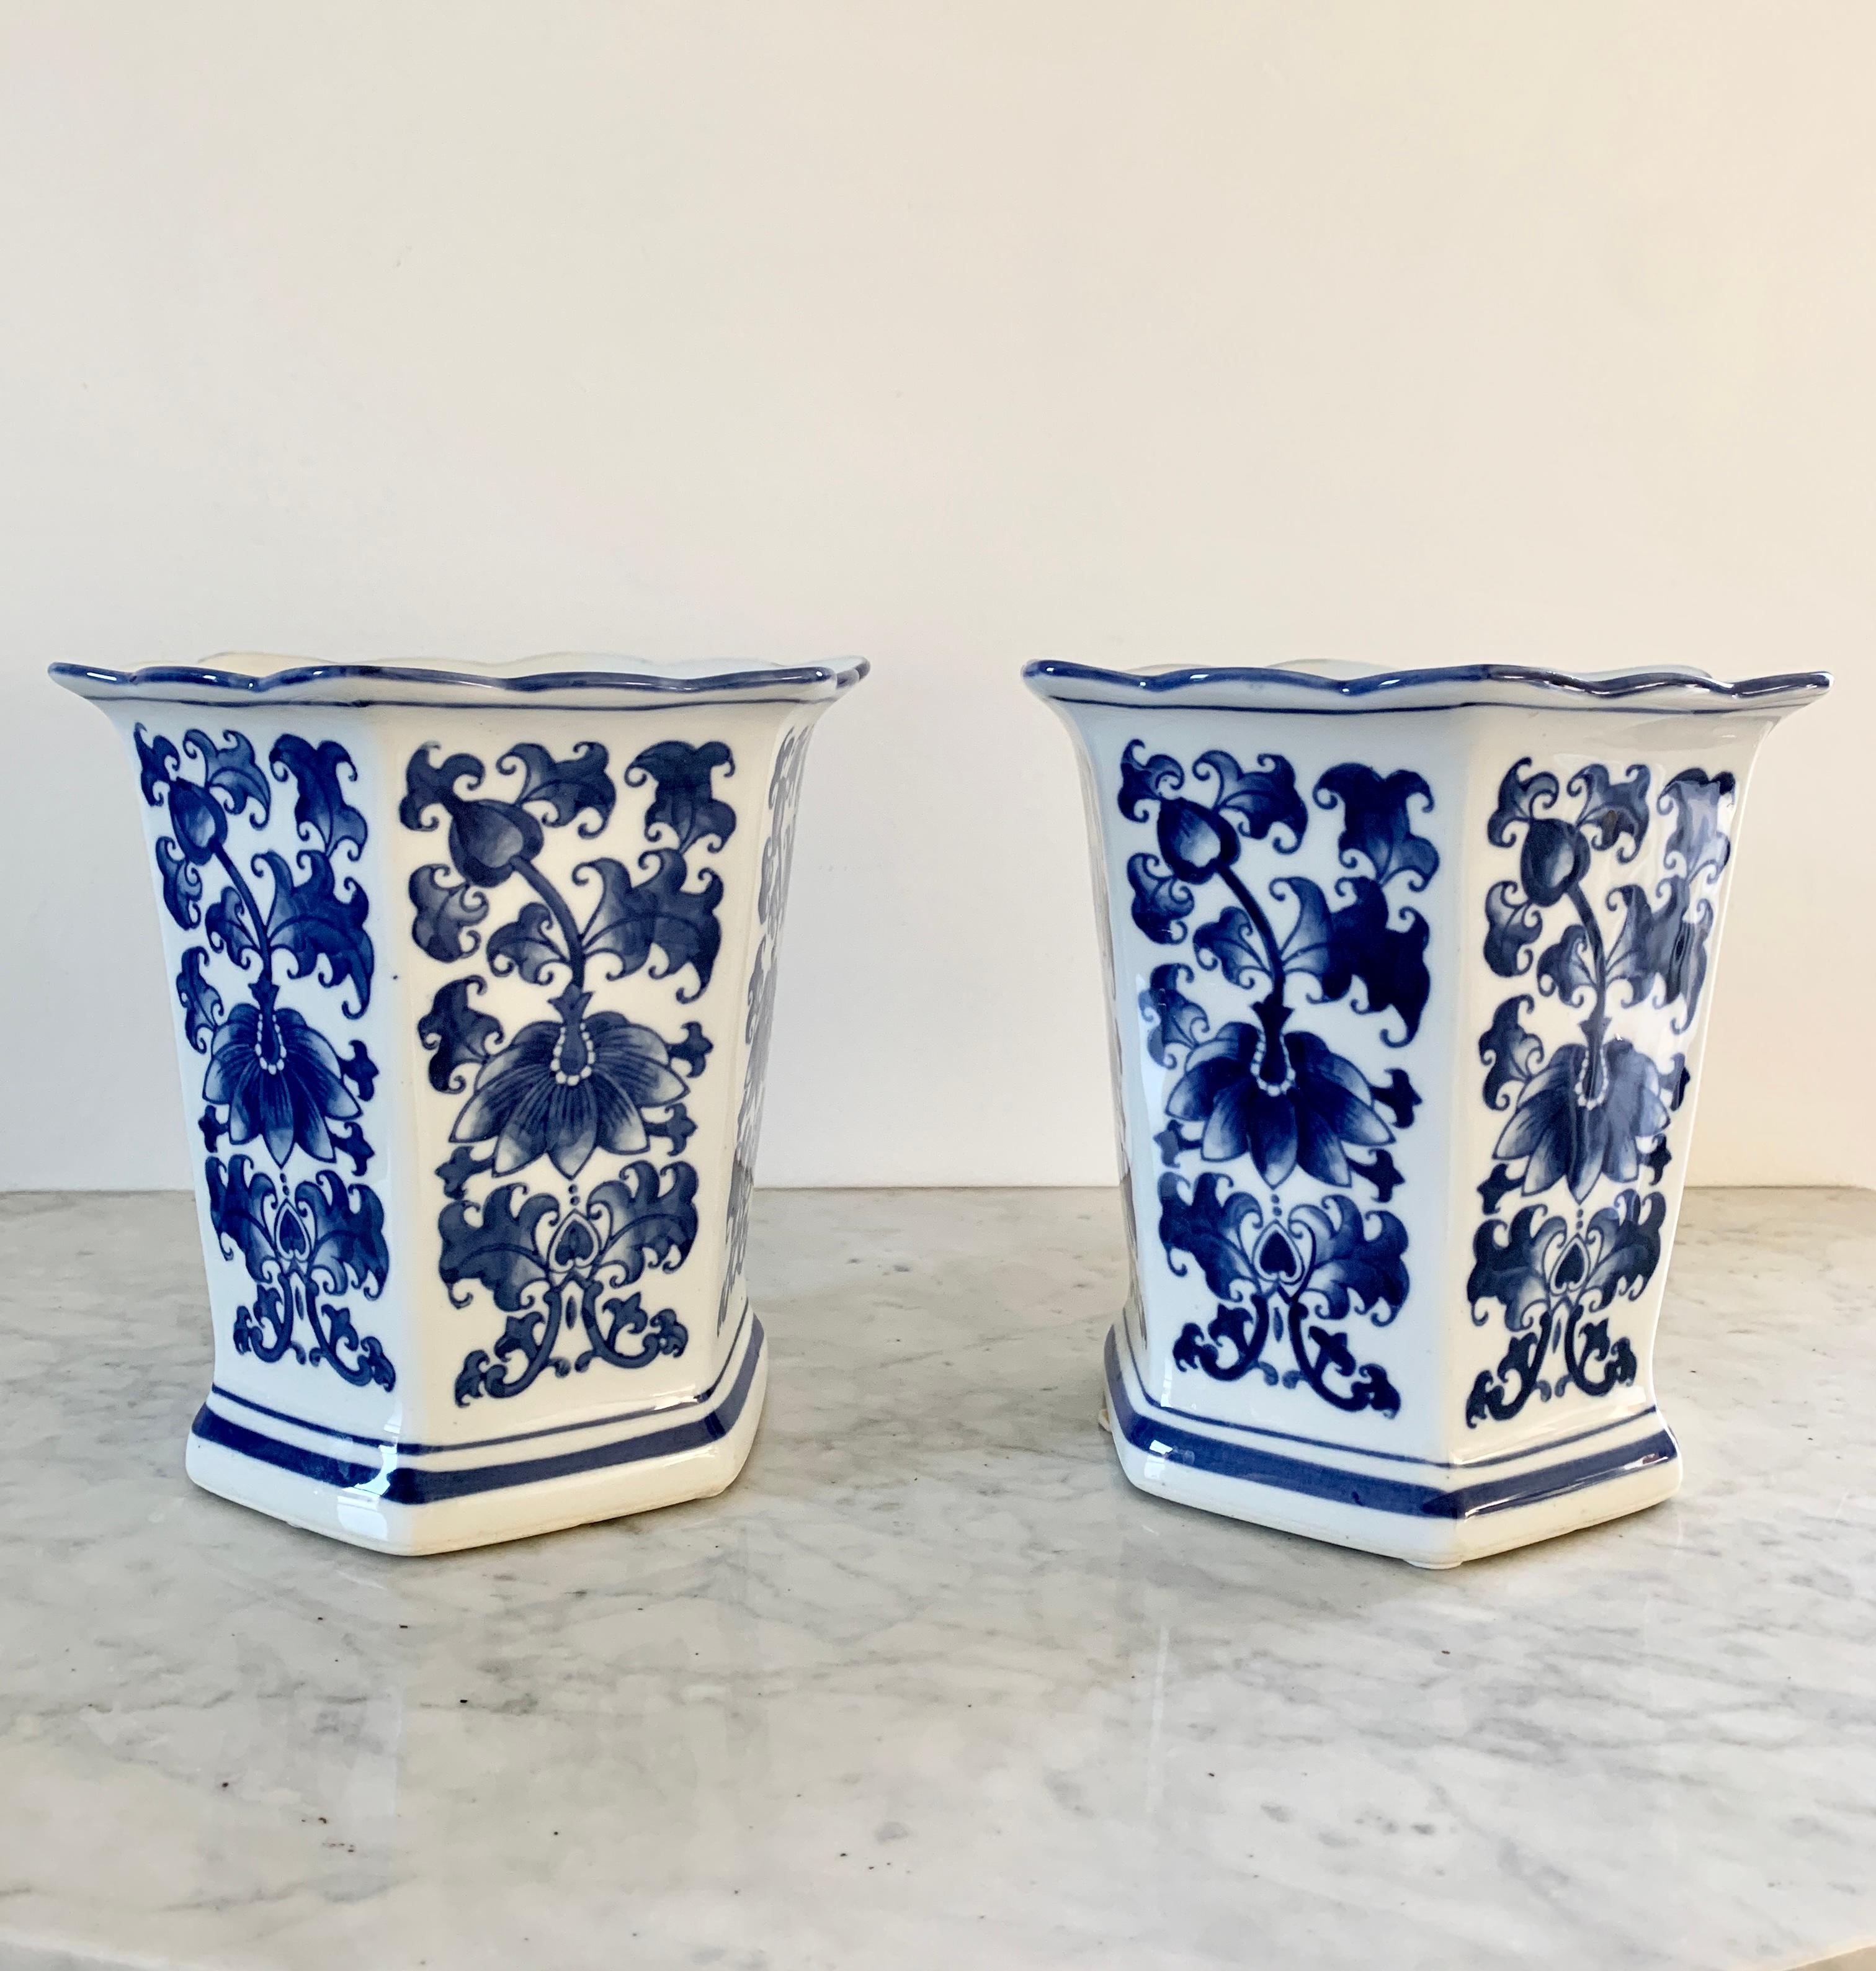 Chinoiserie Blue and White Porcelain Hexagonal Vases, Pair In Good Condition For Sale In Elkhart, IN